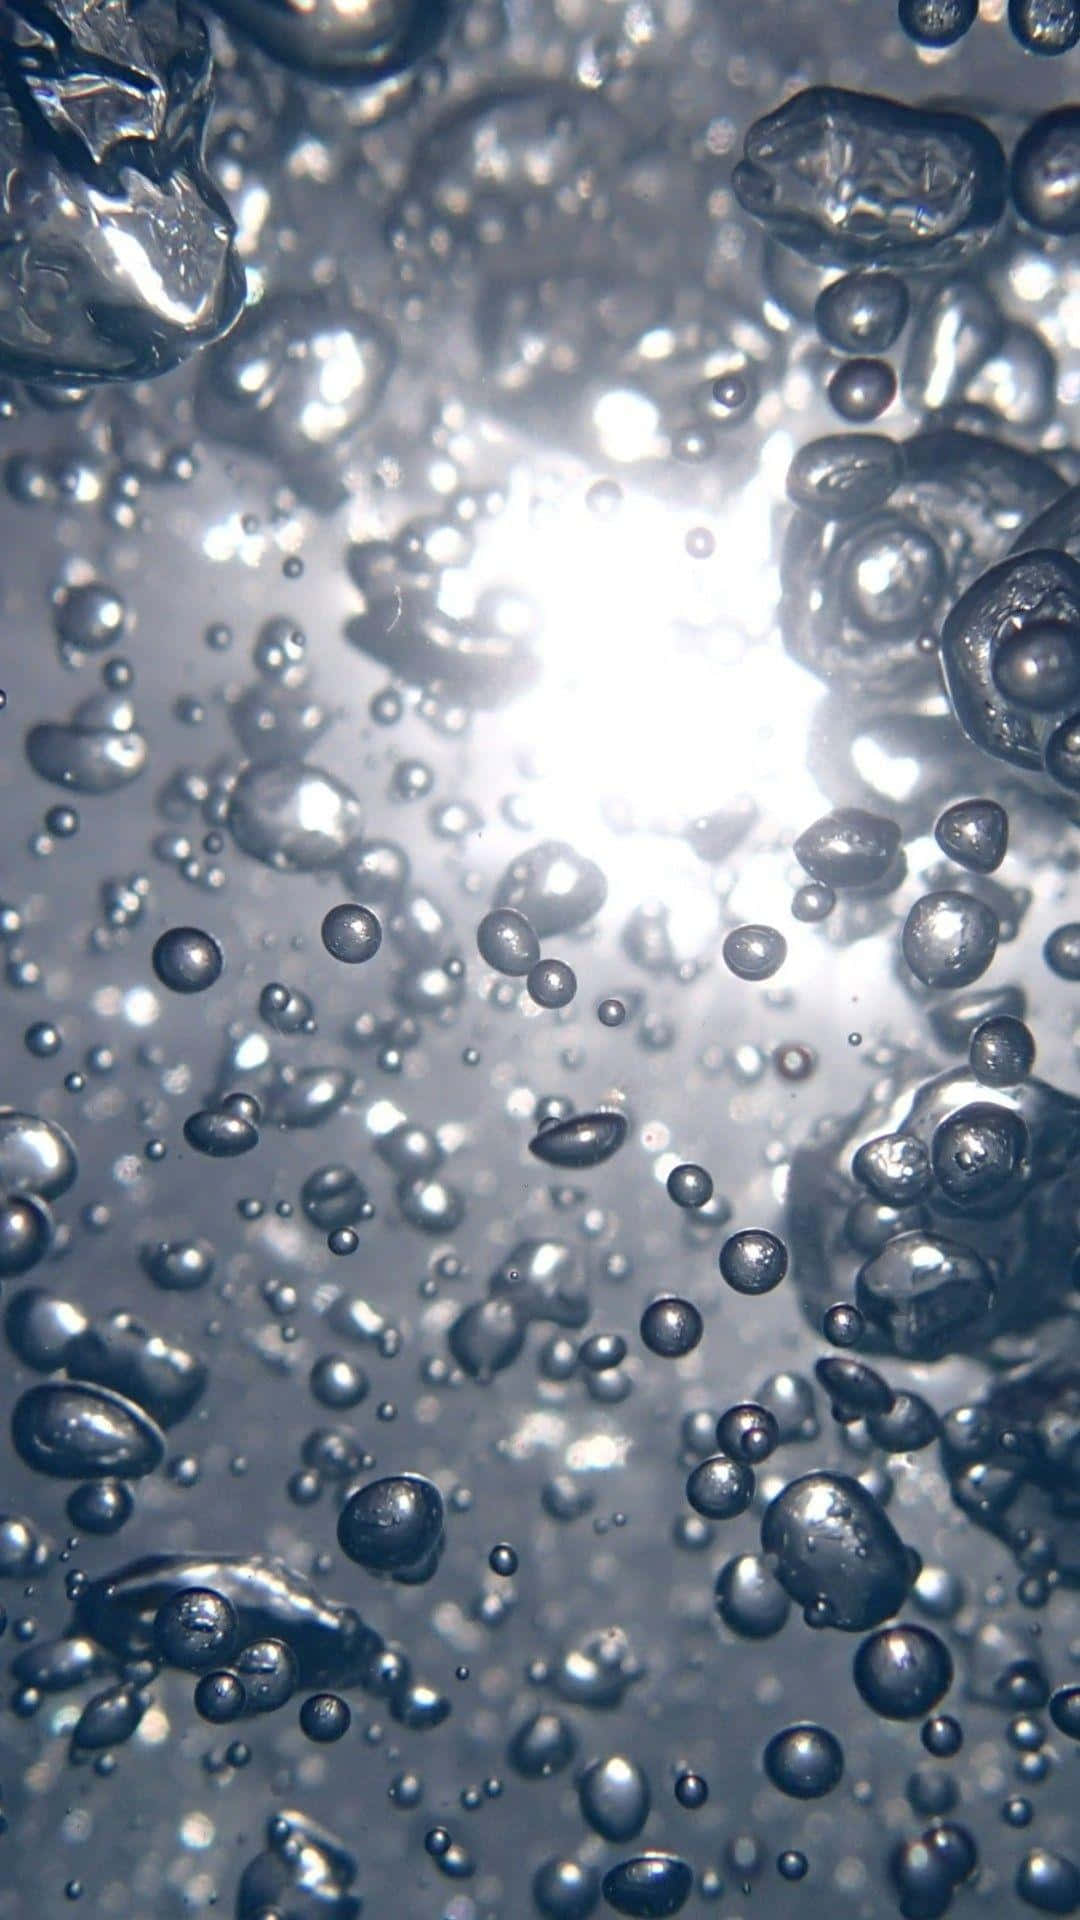 “A stunning, glistening droplet of water hangs in the air and captures light like a diamond”